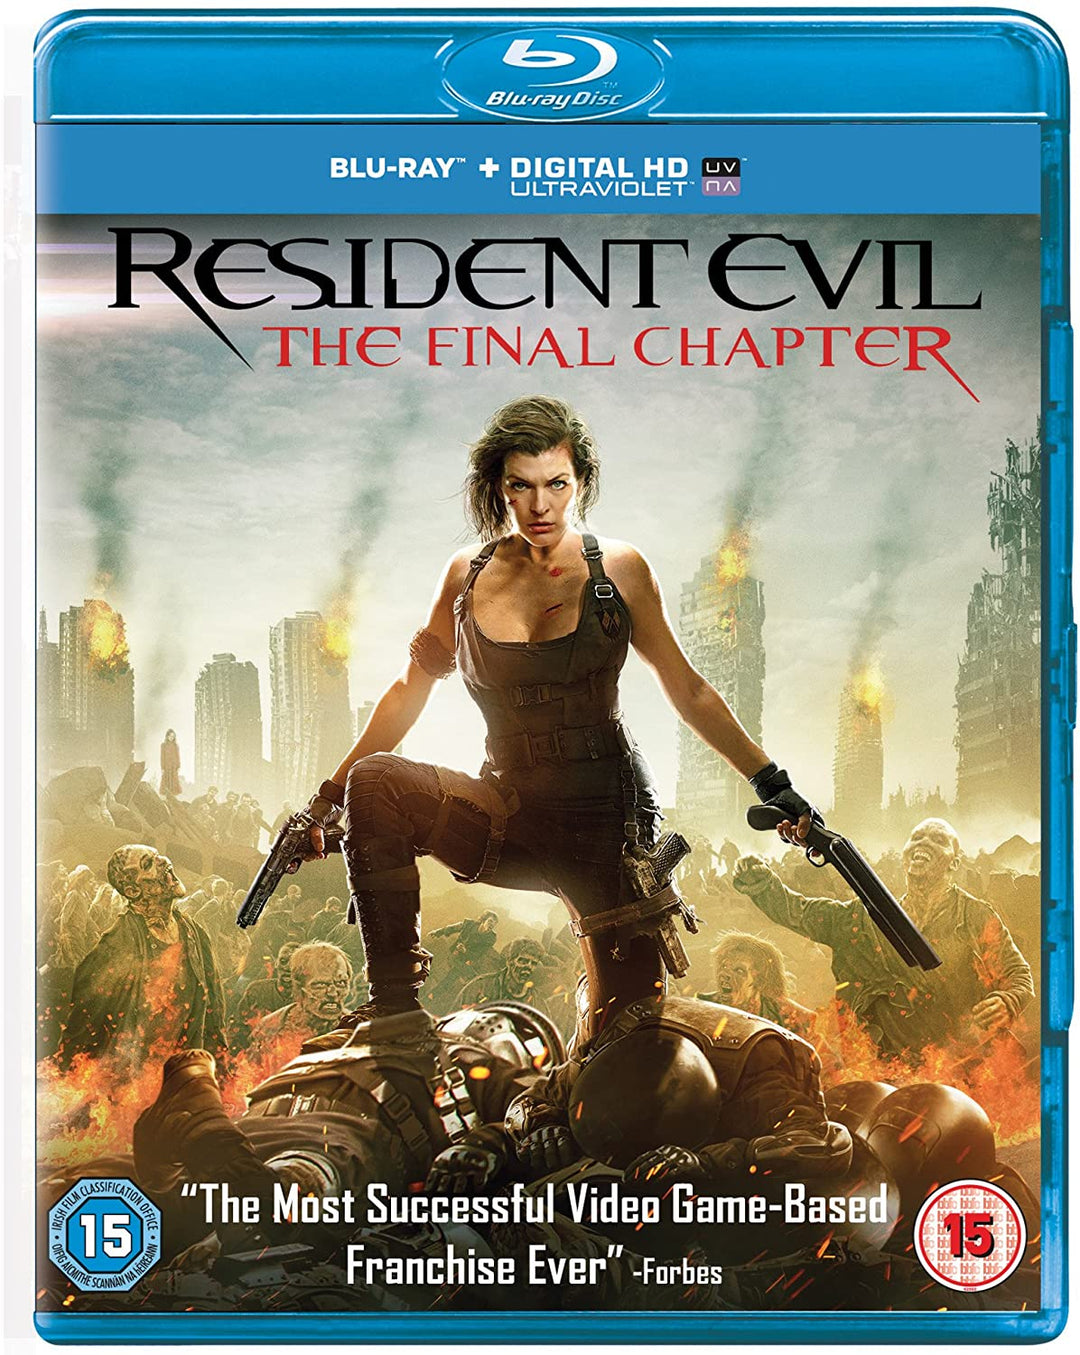 Resident Evil: The Final Chapter [Blu-ray] [2017] [Región libre]